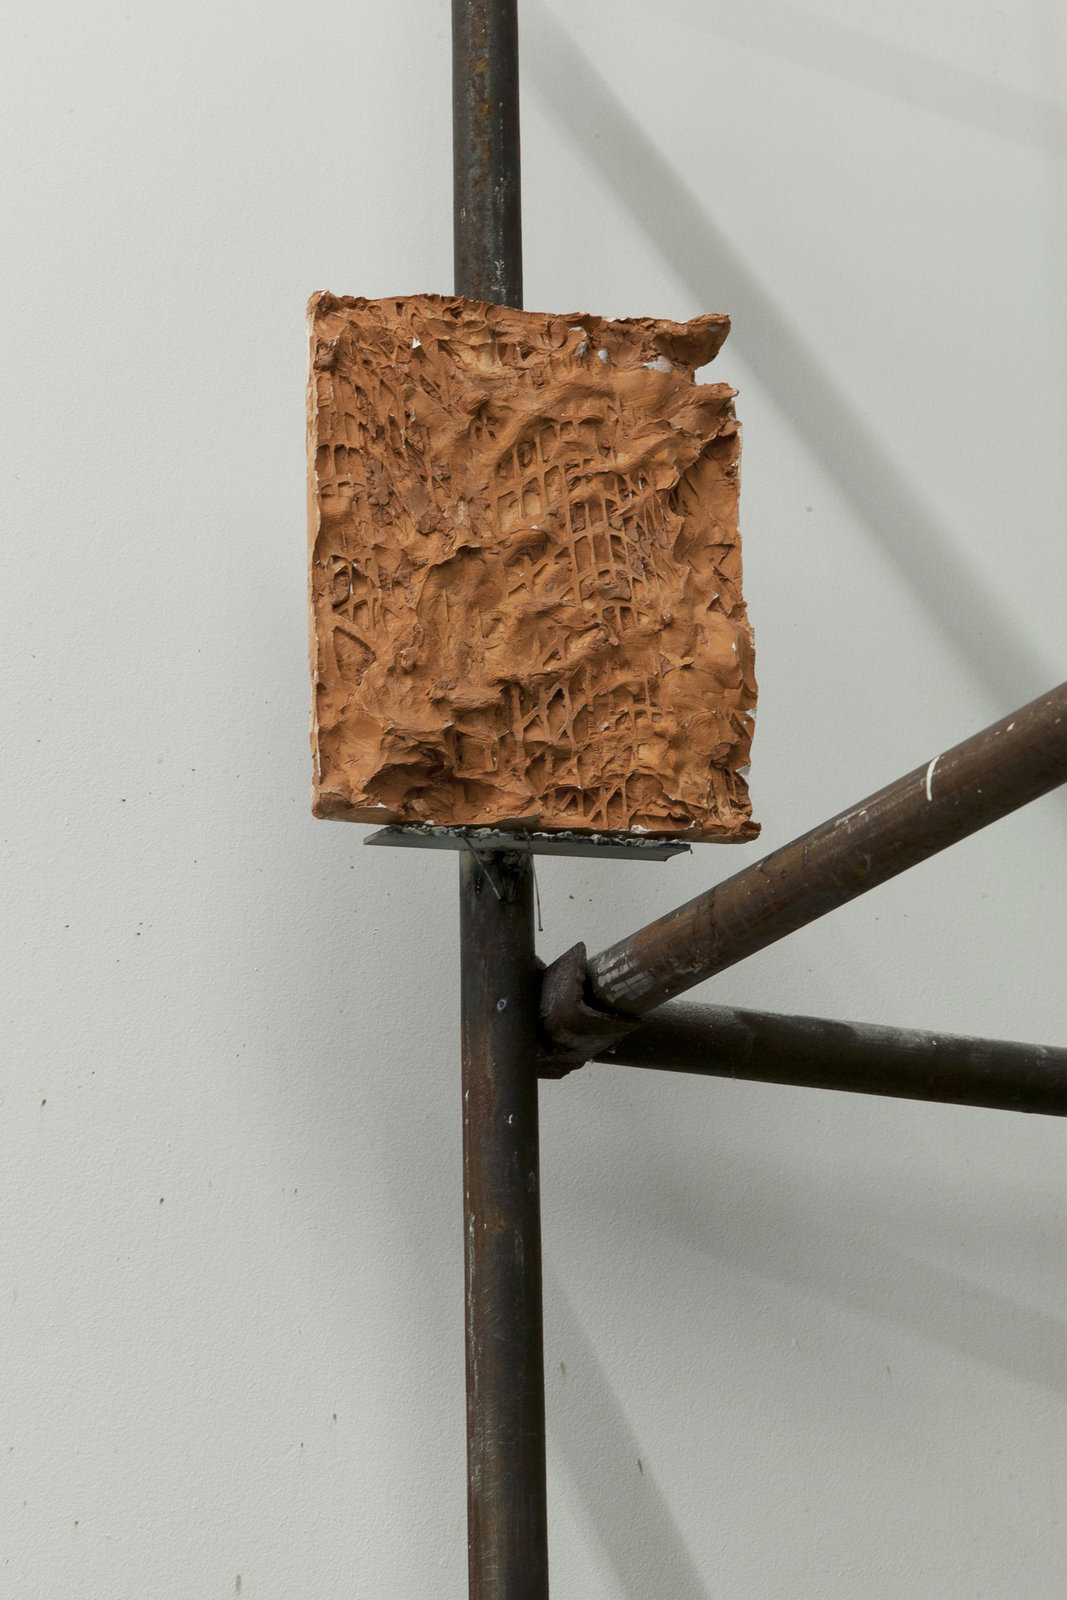 016_Brendan Flanagan. After Untitled 40. Plaster, Acrylic and Clay. 21.5 x 28 cm. 2016. (Detail)